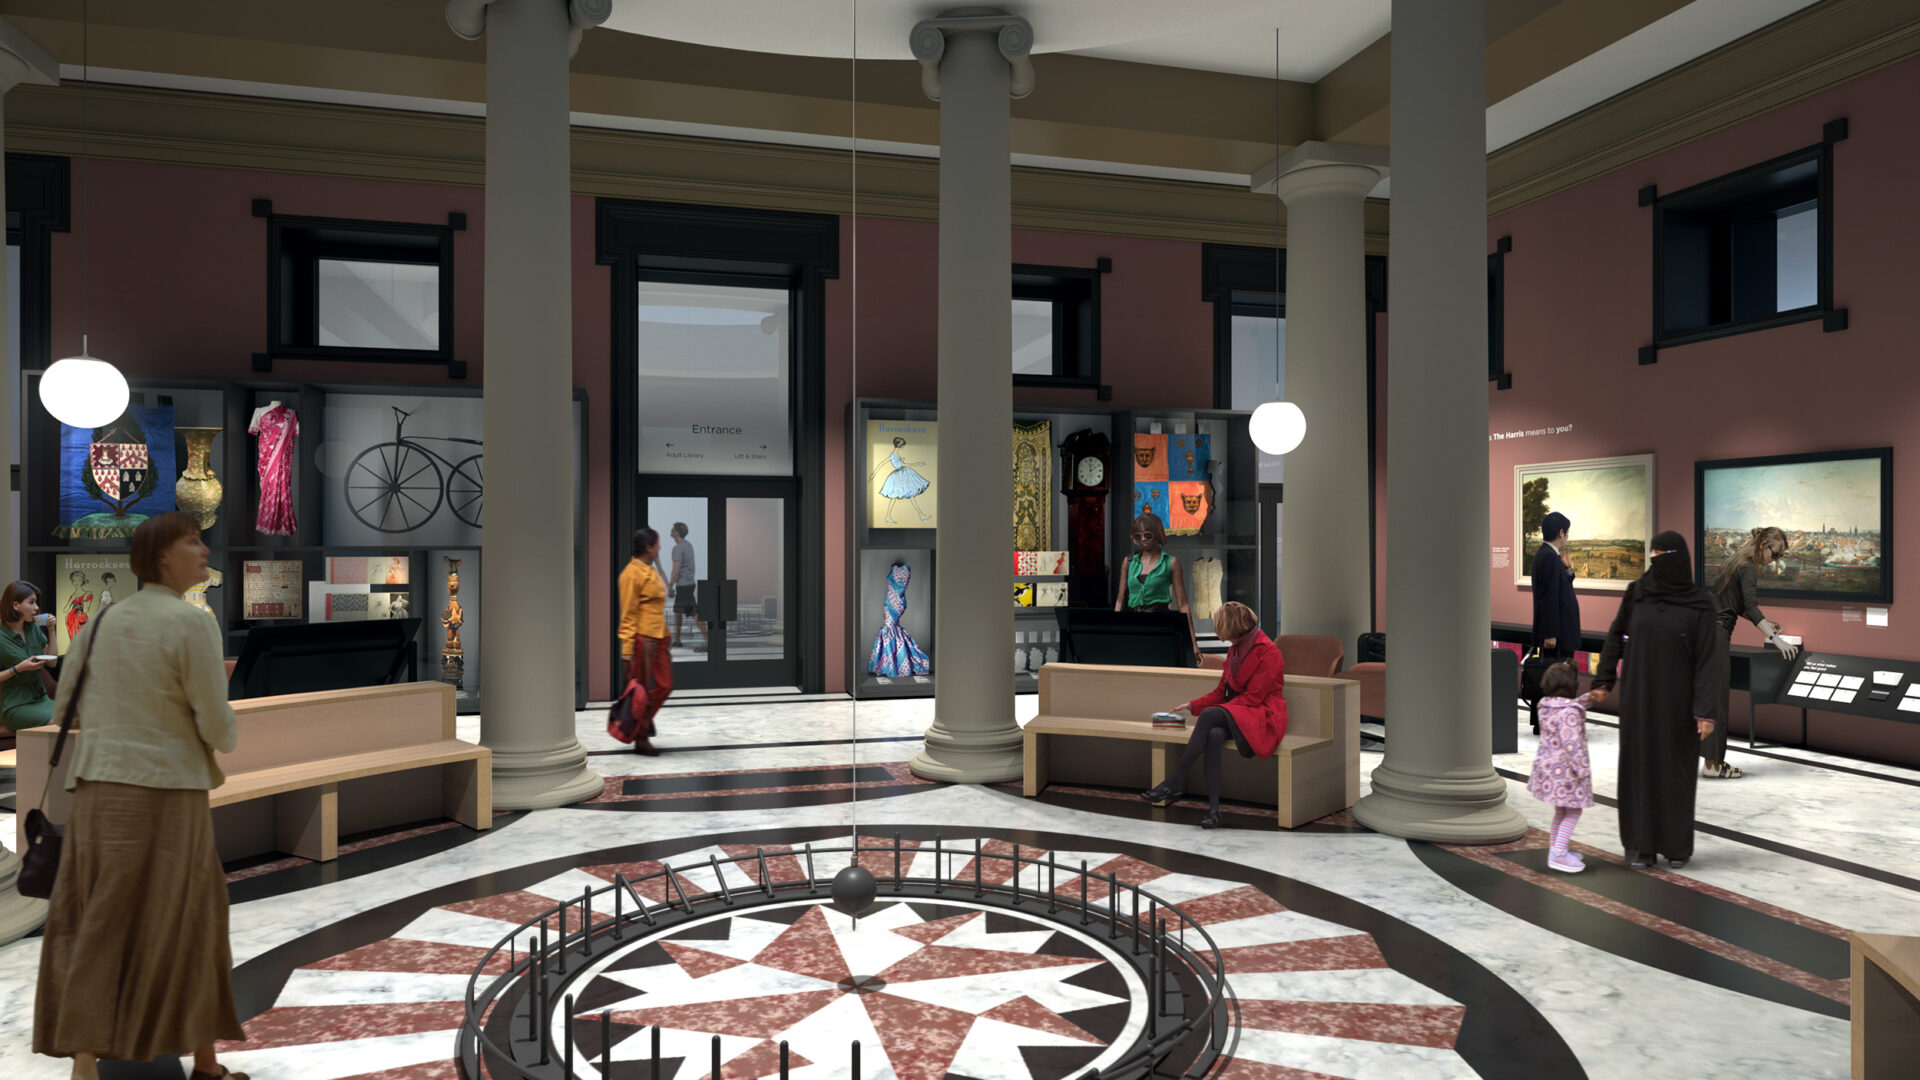 Image of the newly imagined Ground Floor Rotunda with people exploring the space and a view of the pendulum.